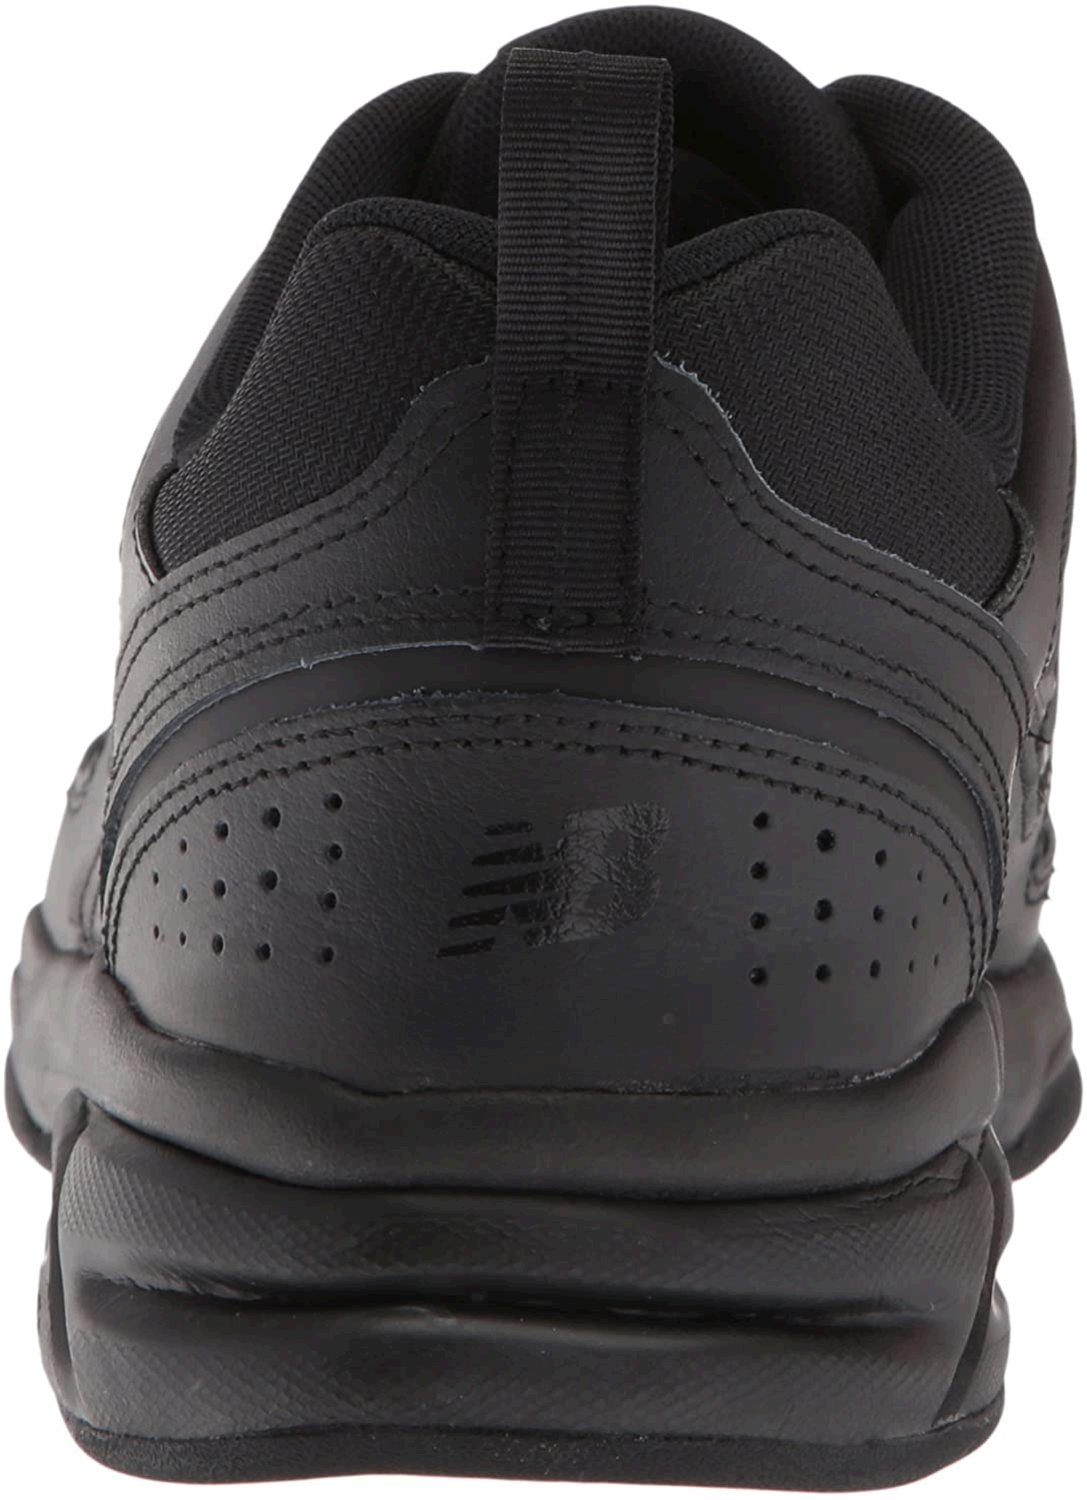 New Balance Mens MX623AB3 Low Top Lace Up Running Sneaker, Black, Size ...